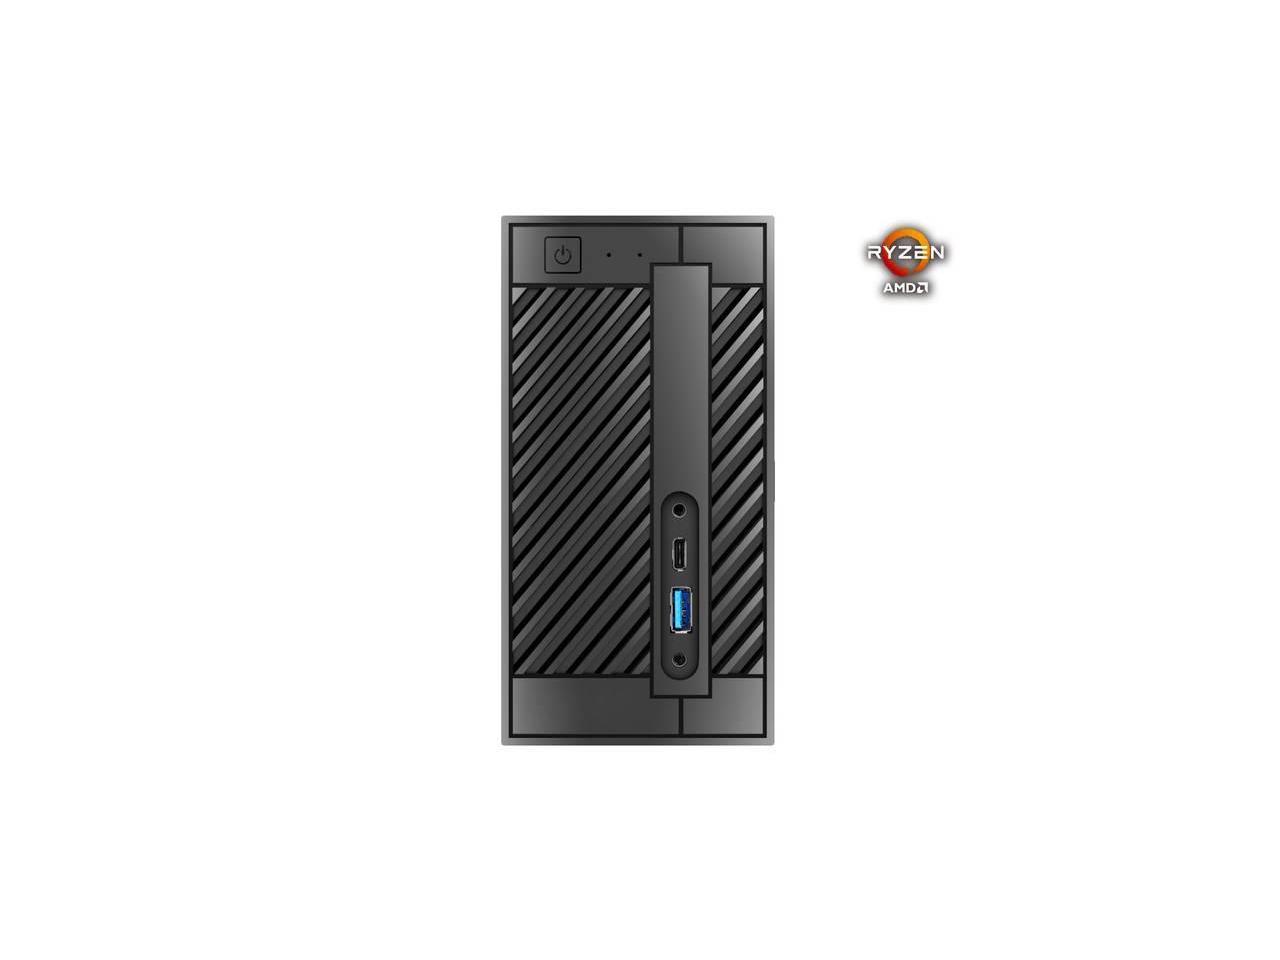 ASROCK NT-DESKMINI A300W ASRock NT-DESKMINI A300W AMD AM4/ DDR4/ WiFi/ A and V and GbE/ Mini PC Barebone System